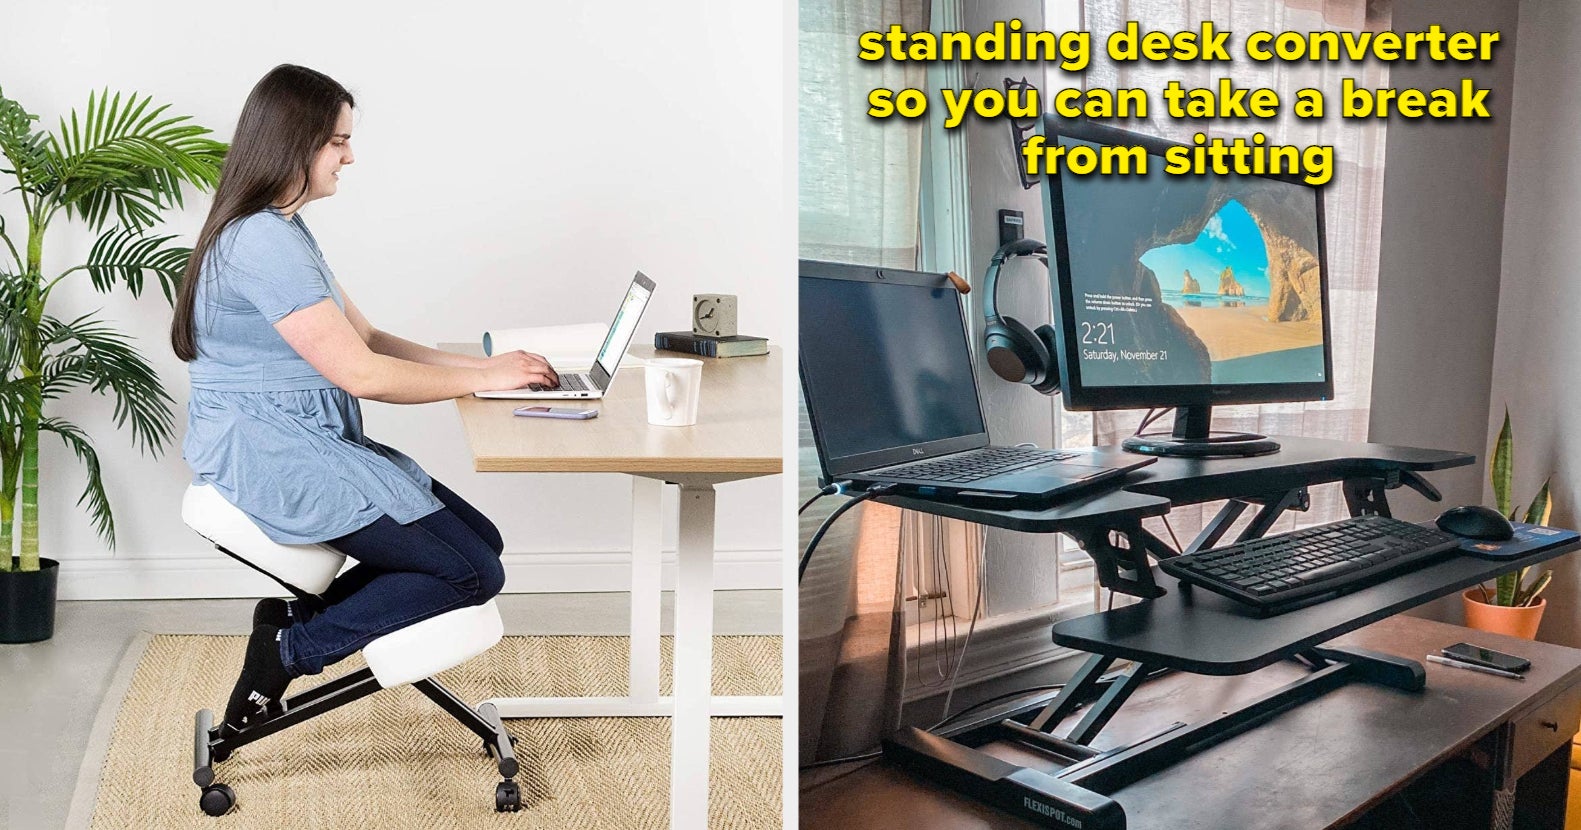 Stand Steady Small Anti Fatigue Standing Mat with Carrying Handle | Ergonomic Standing Mat with Gel Foam Padding | Portable Comfort Mat for Standing